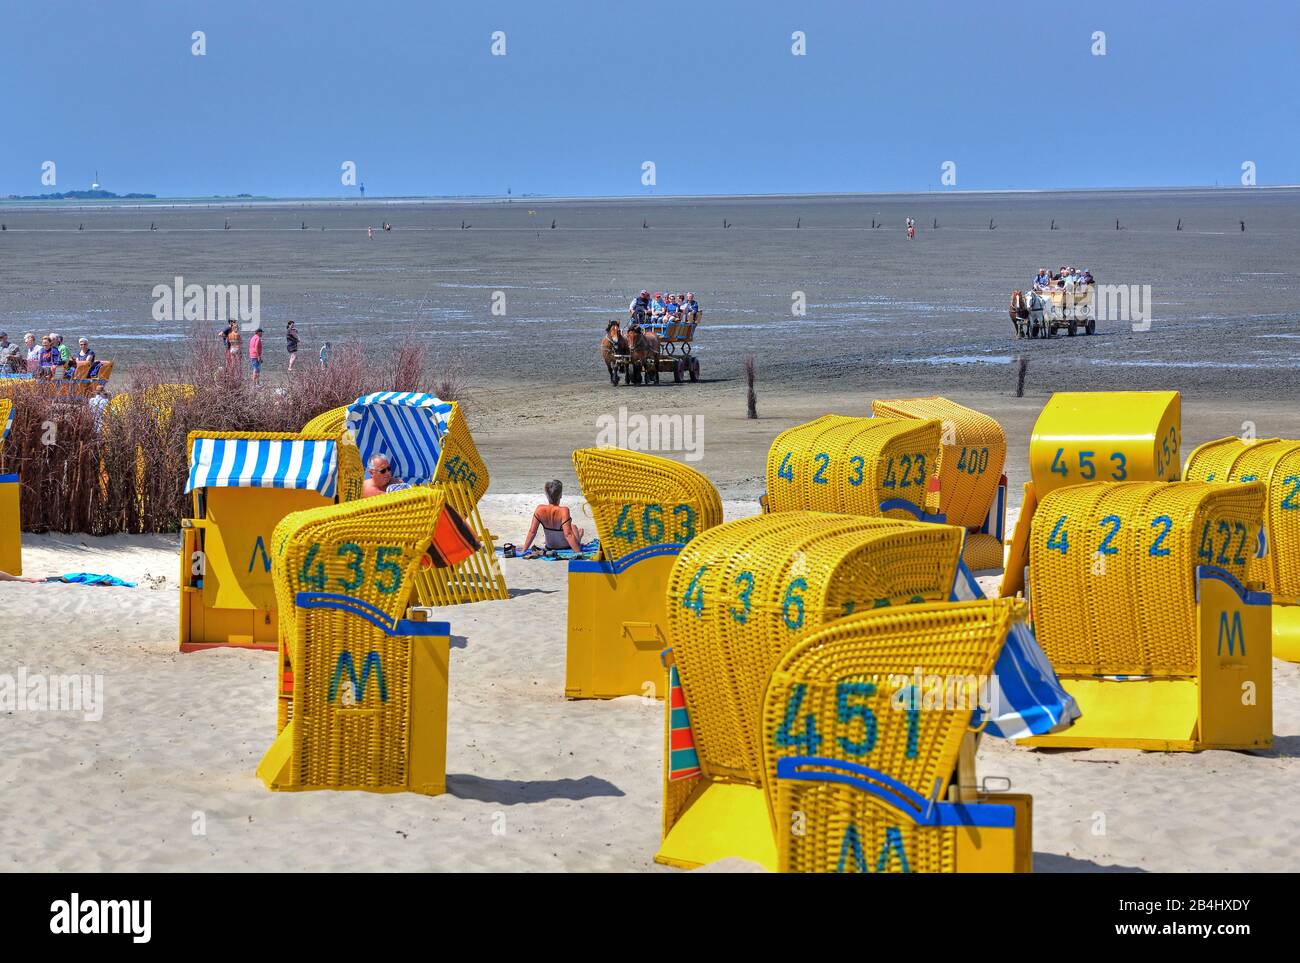 Beach with beach chairs on the Wadden Sea at low tide with Wattwagen in the district of Duhnen, North Sea resort Cuxhaven, Elbe estuary, North Sea, North Sea coast, Lower Saxony, Germany Stock Photo